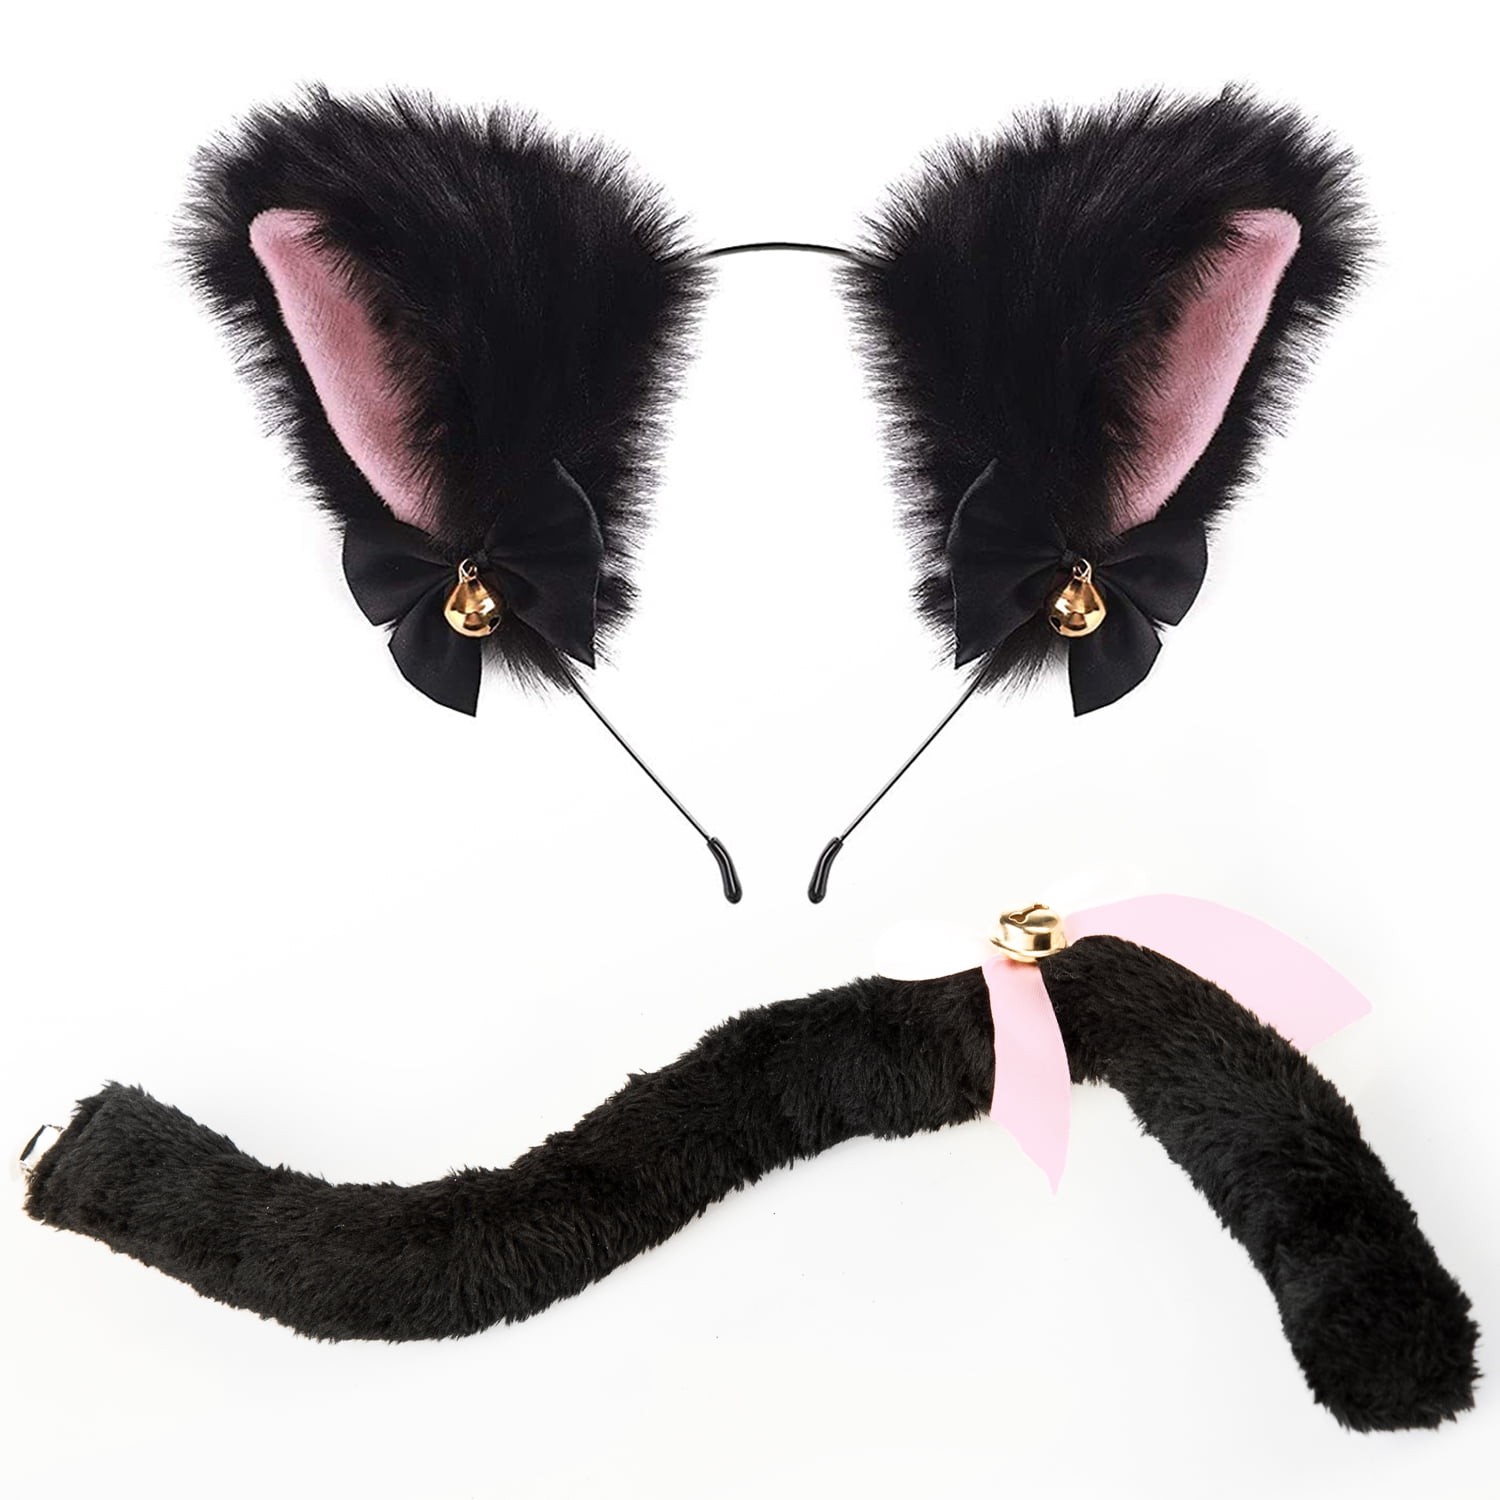 Funcredible Cat Ears And Tail Set Furry Cat Ears Headband With Tail